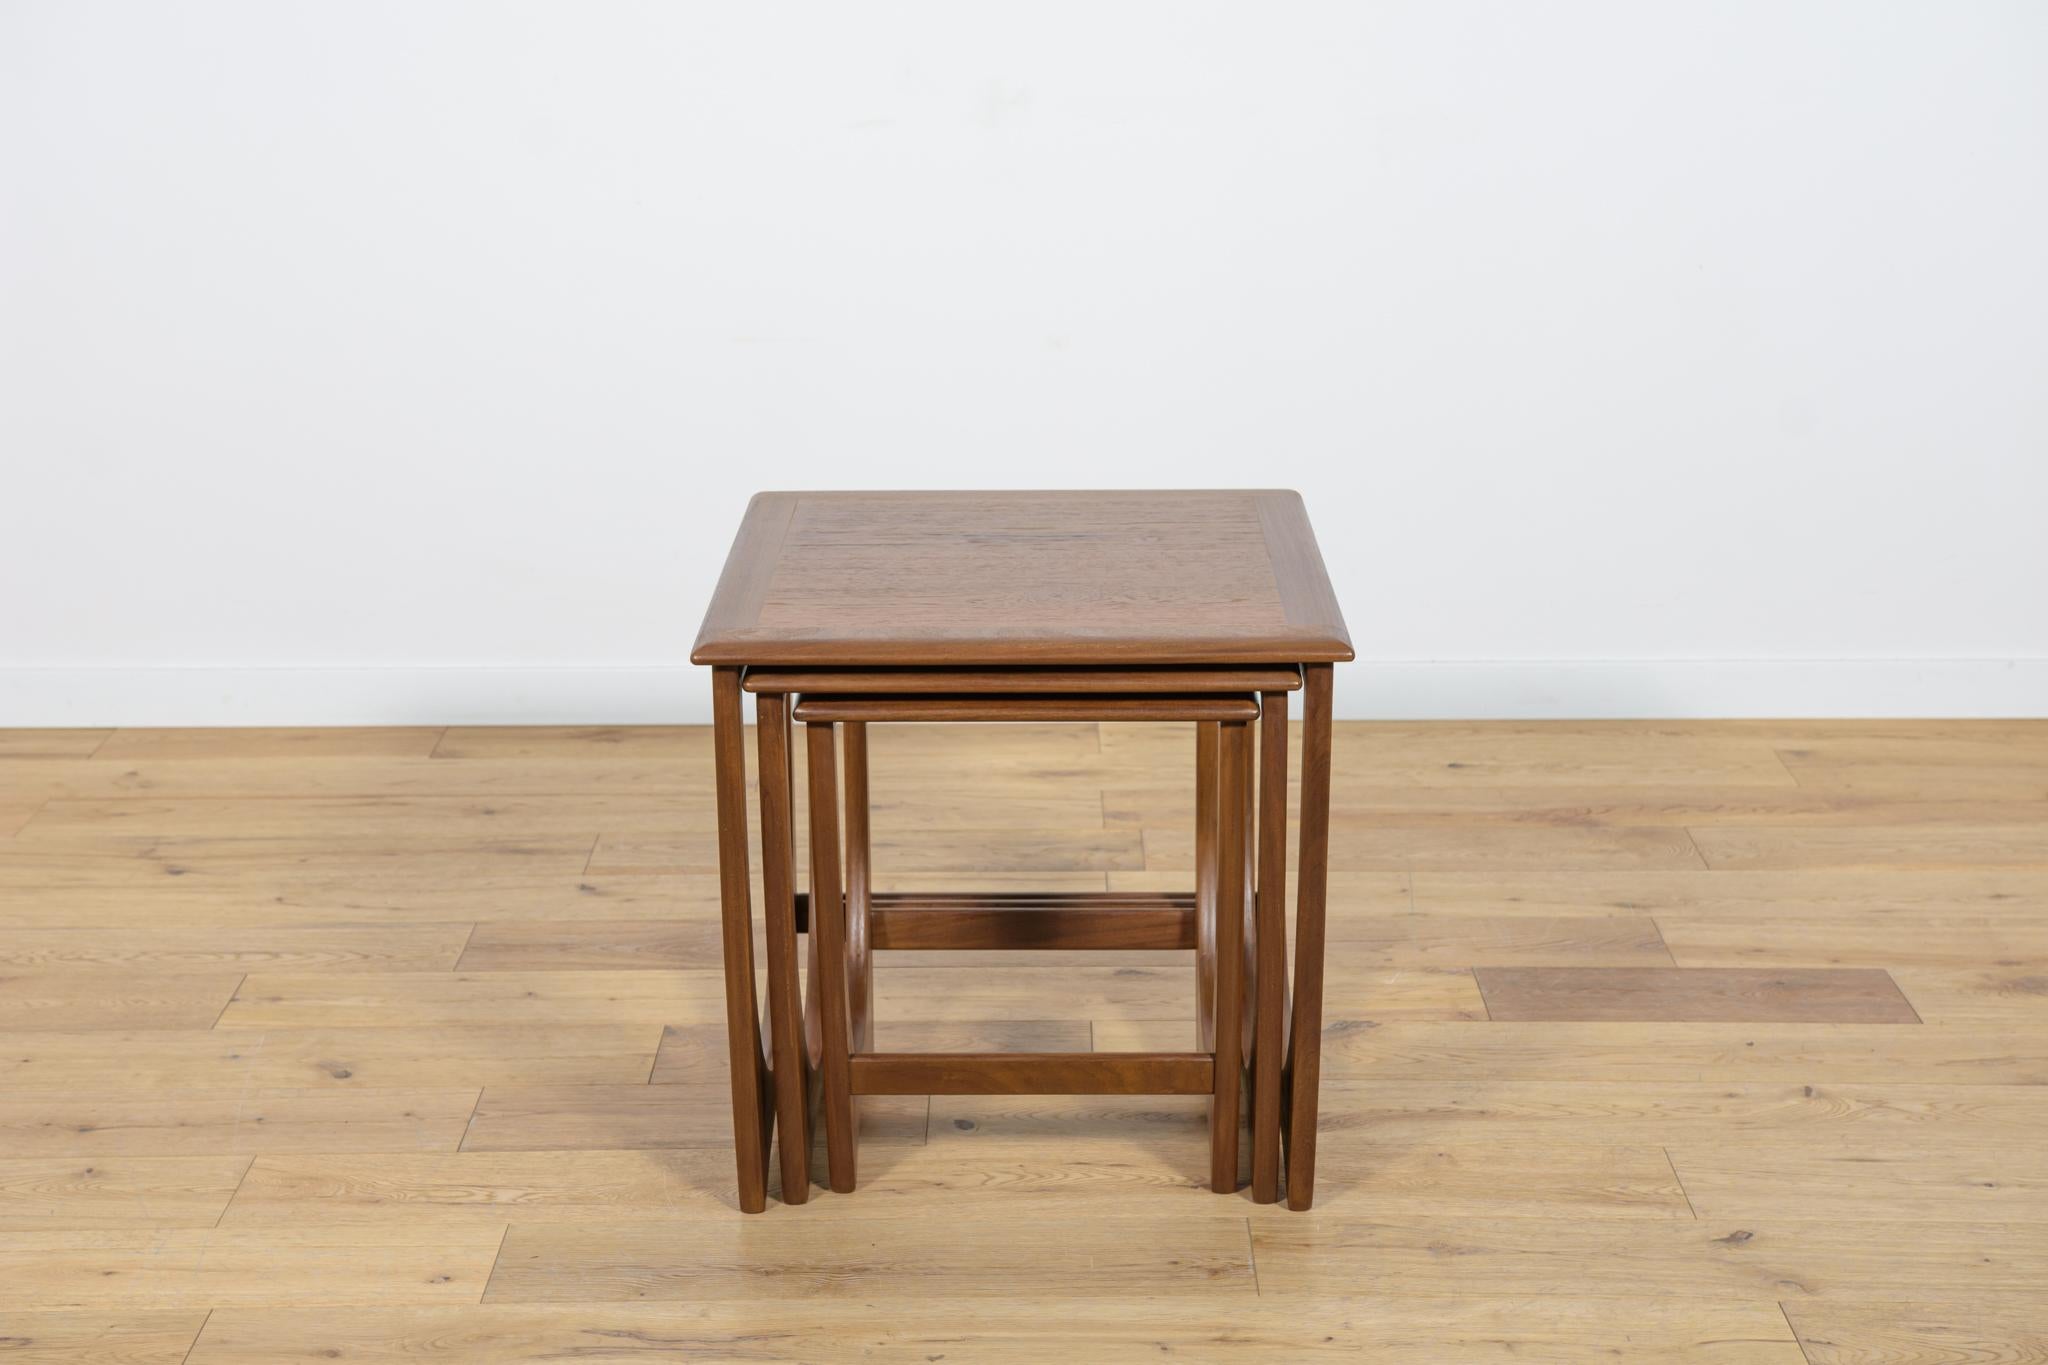 This set of three pull out tables was designed by Victor Wilkins for british manufatured G-Plan. The tables have reinforced profiled edges. Completely restored. The teak elements have been cleaned from the old surface and painted oak stain and